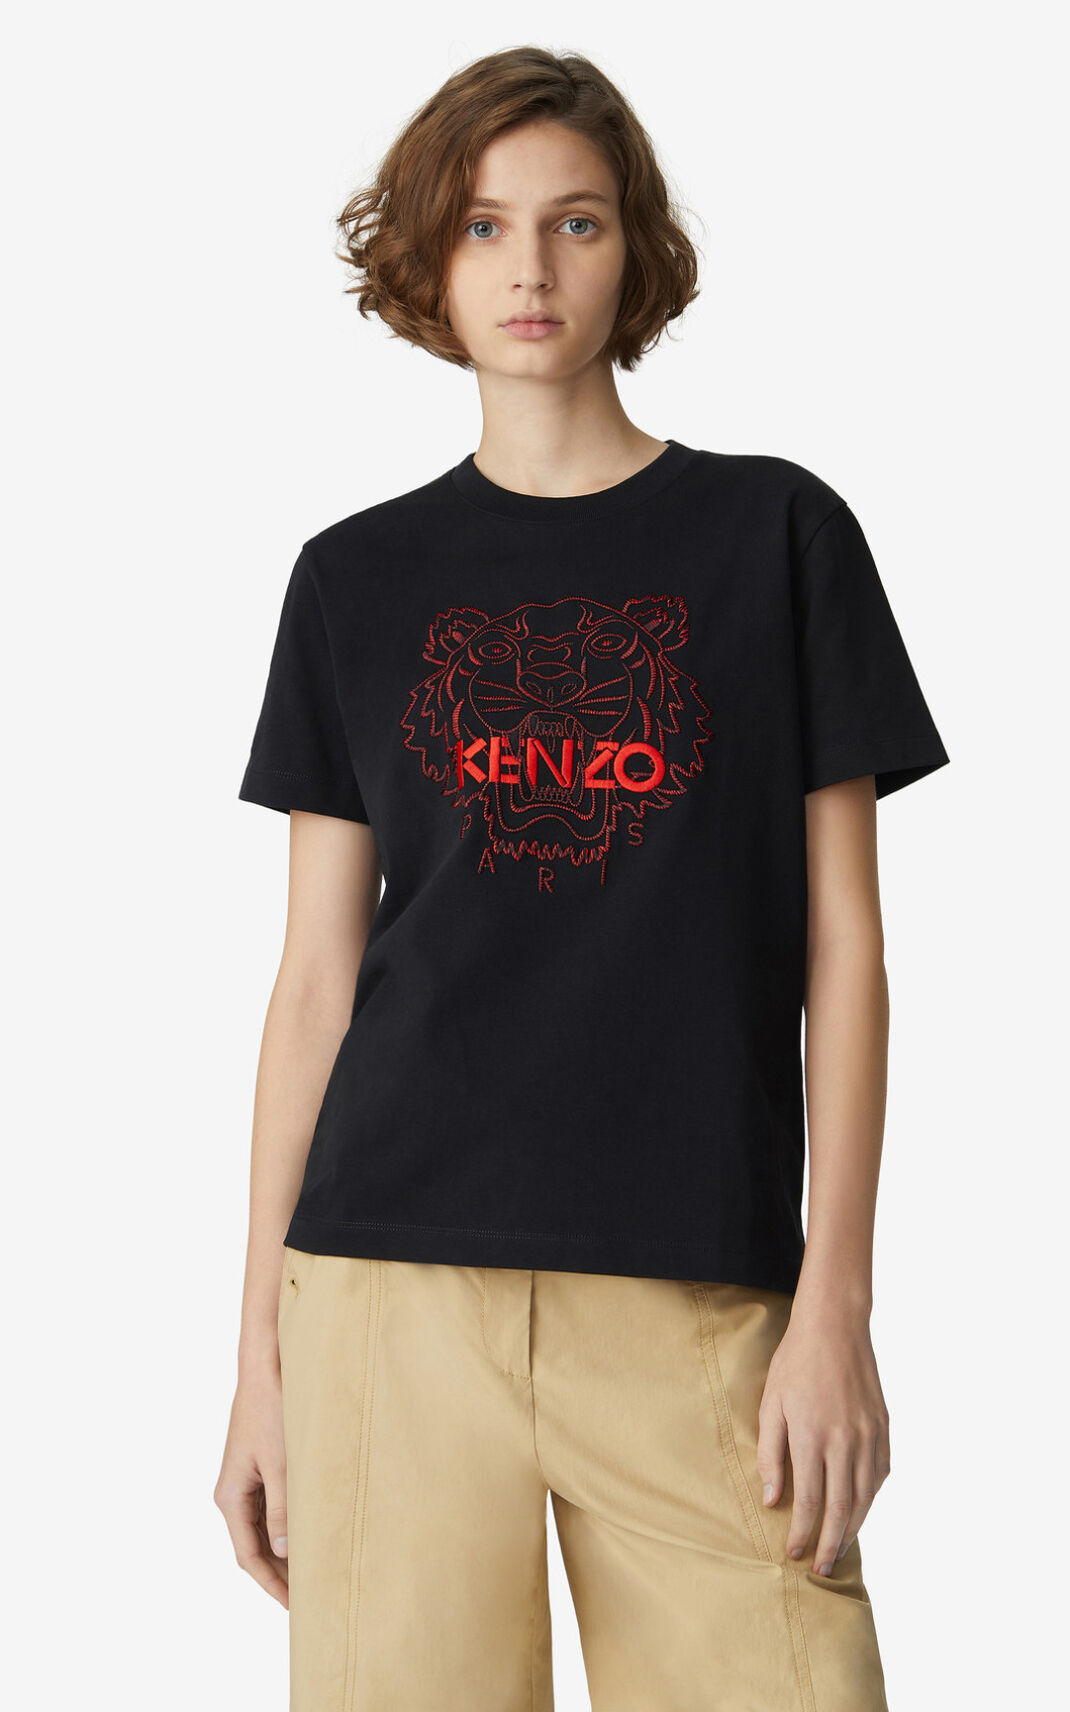 Kenzo Tiger loose fitting T Shirt Black For Womens 2513FYBJT